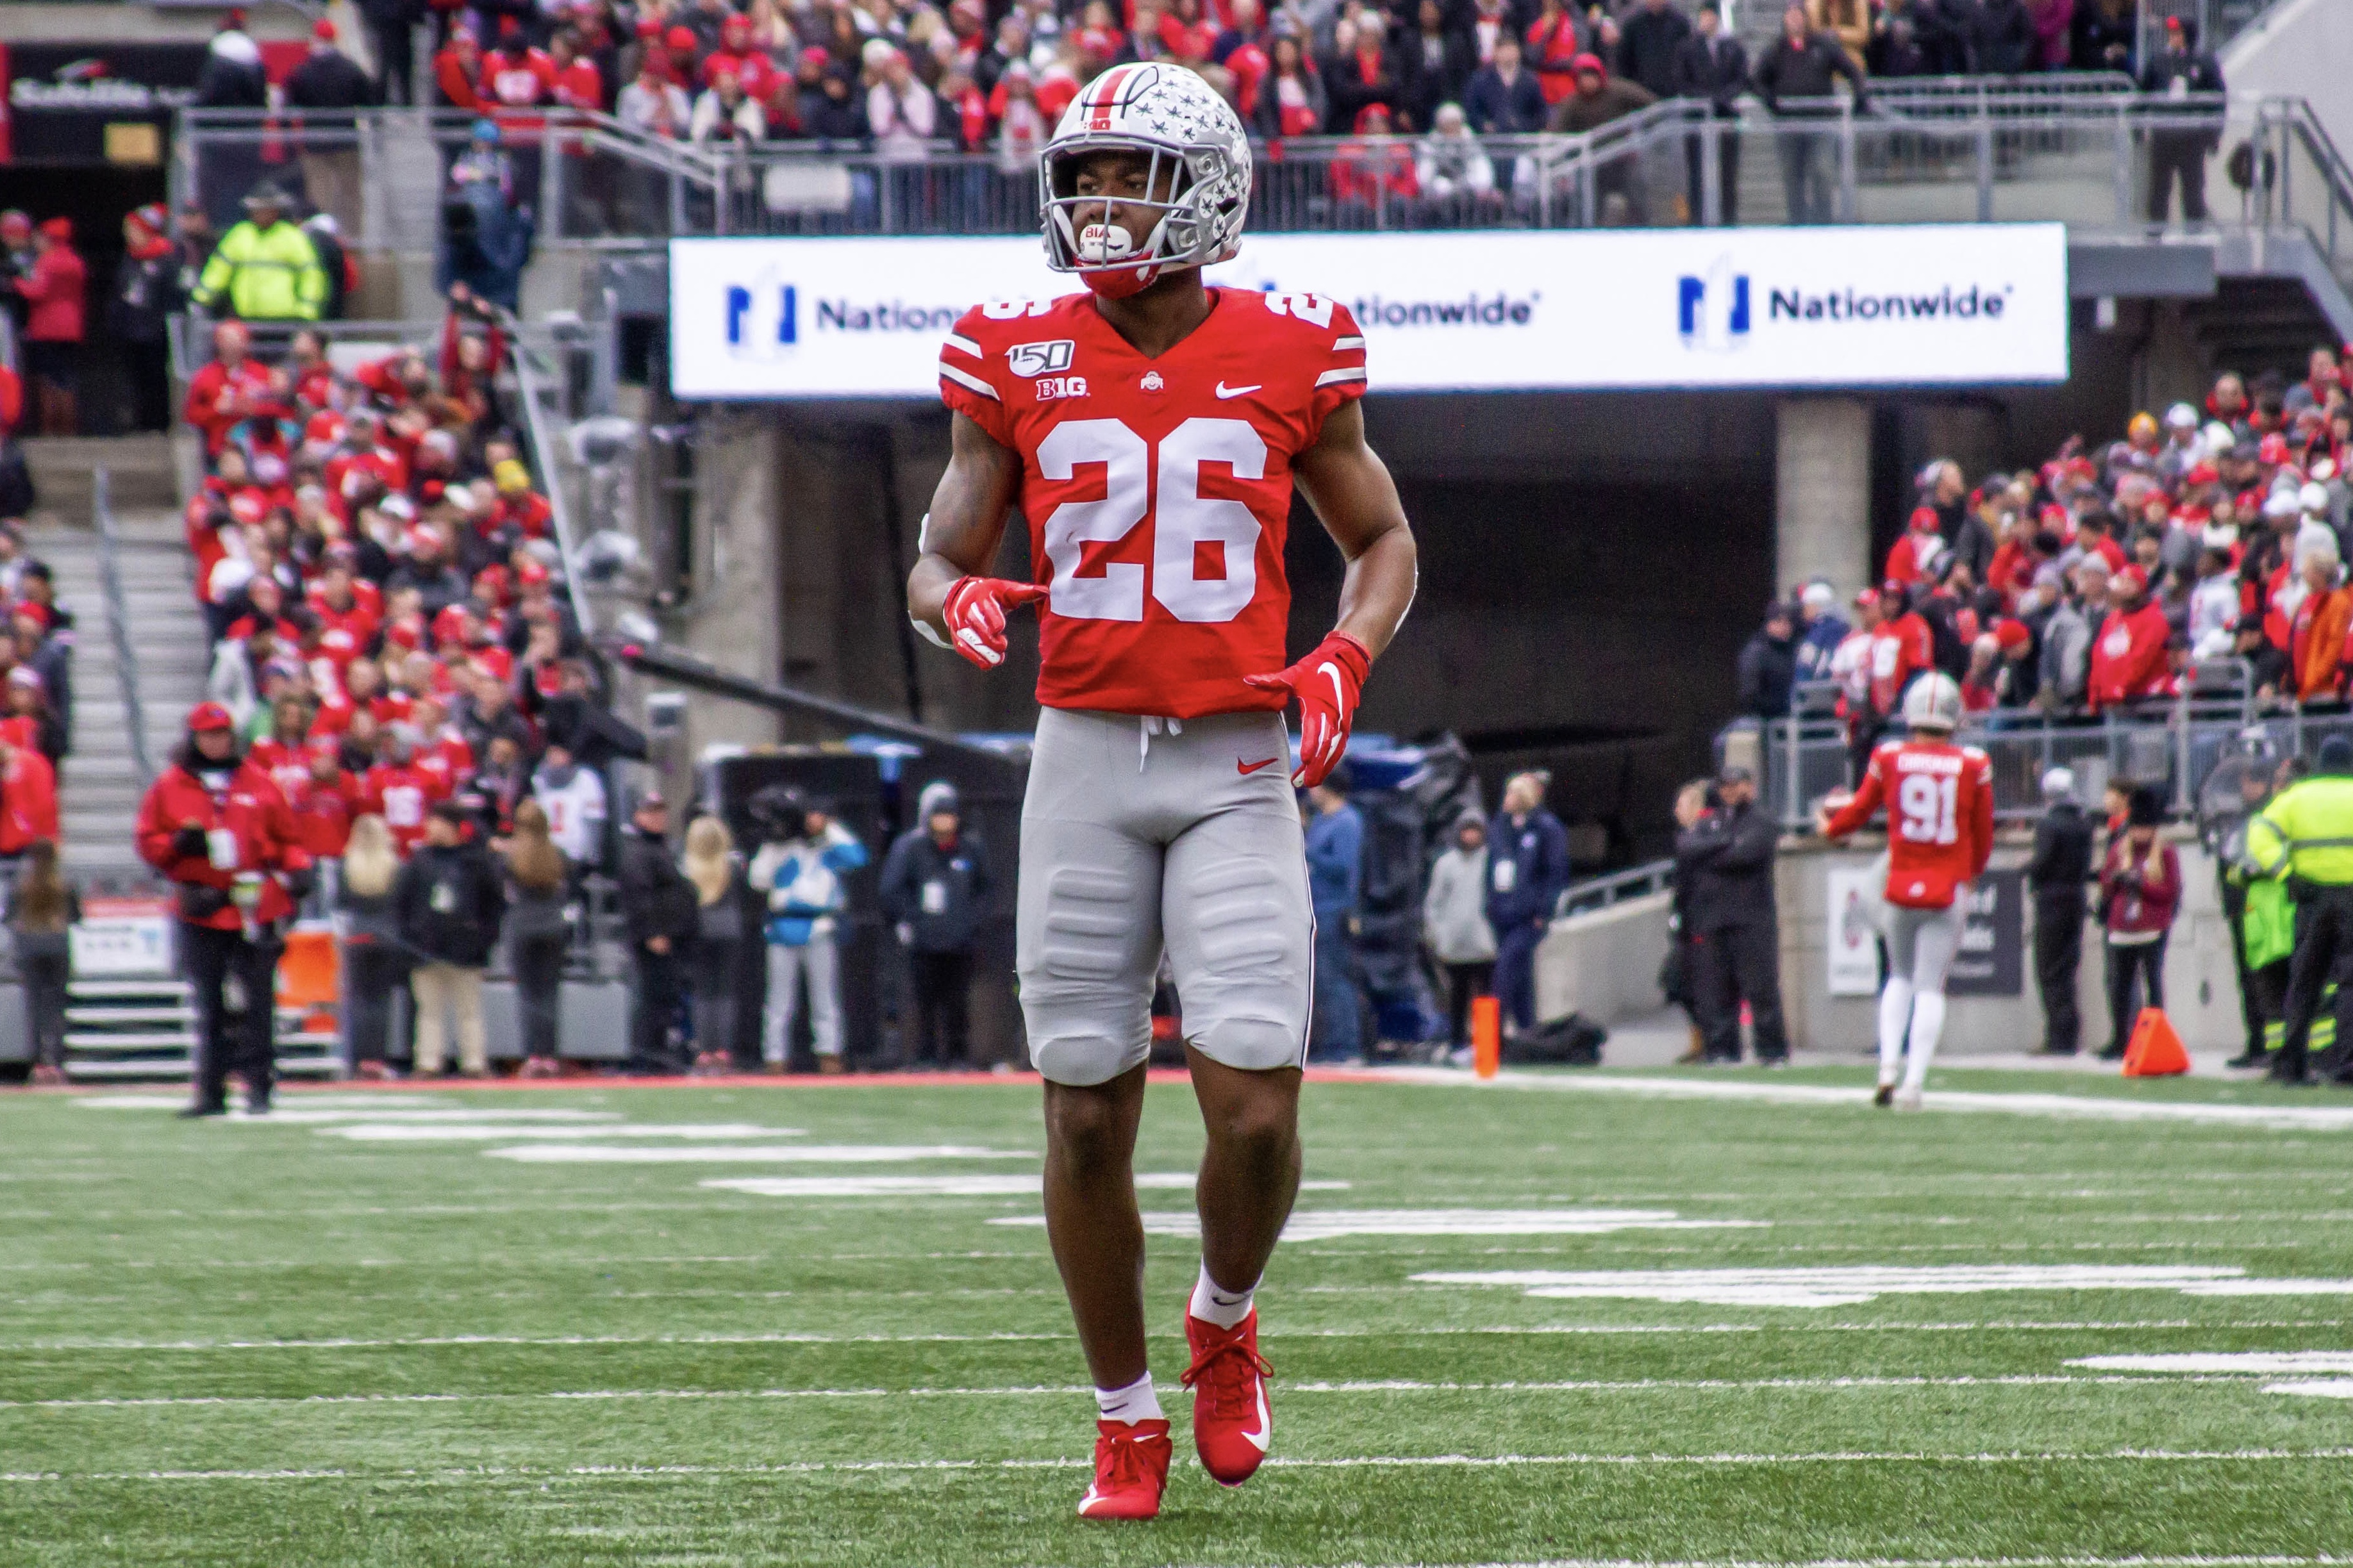 Ohio State Depending On Fully Healthy Cameron Brown – Buckeye Sports Bulletin